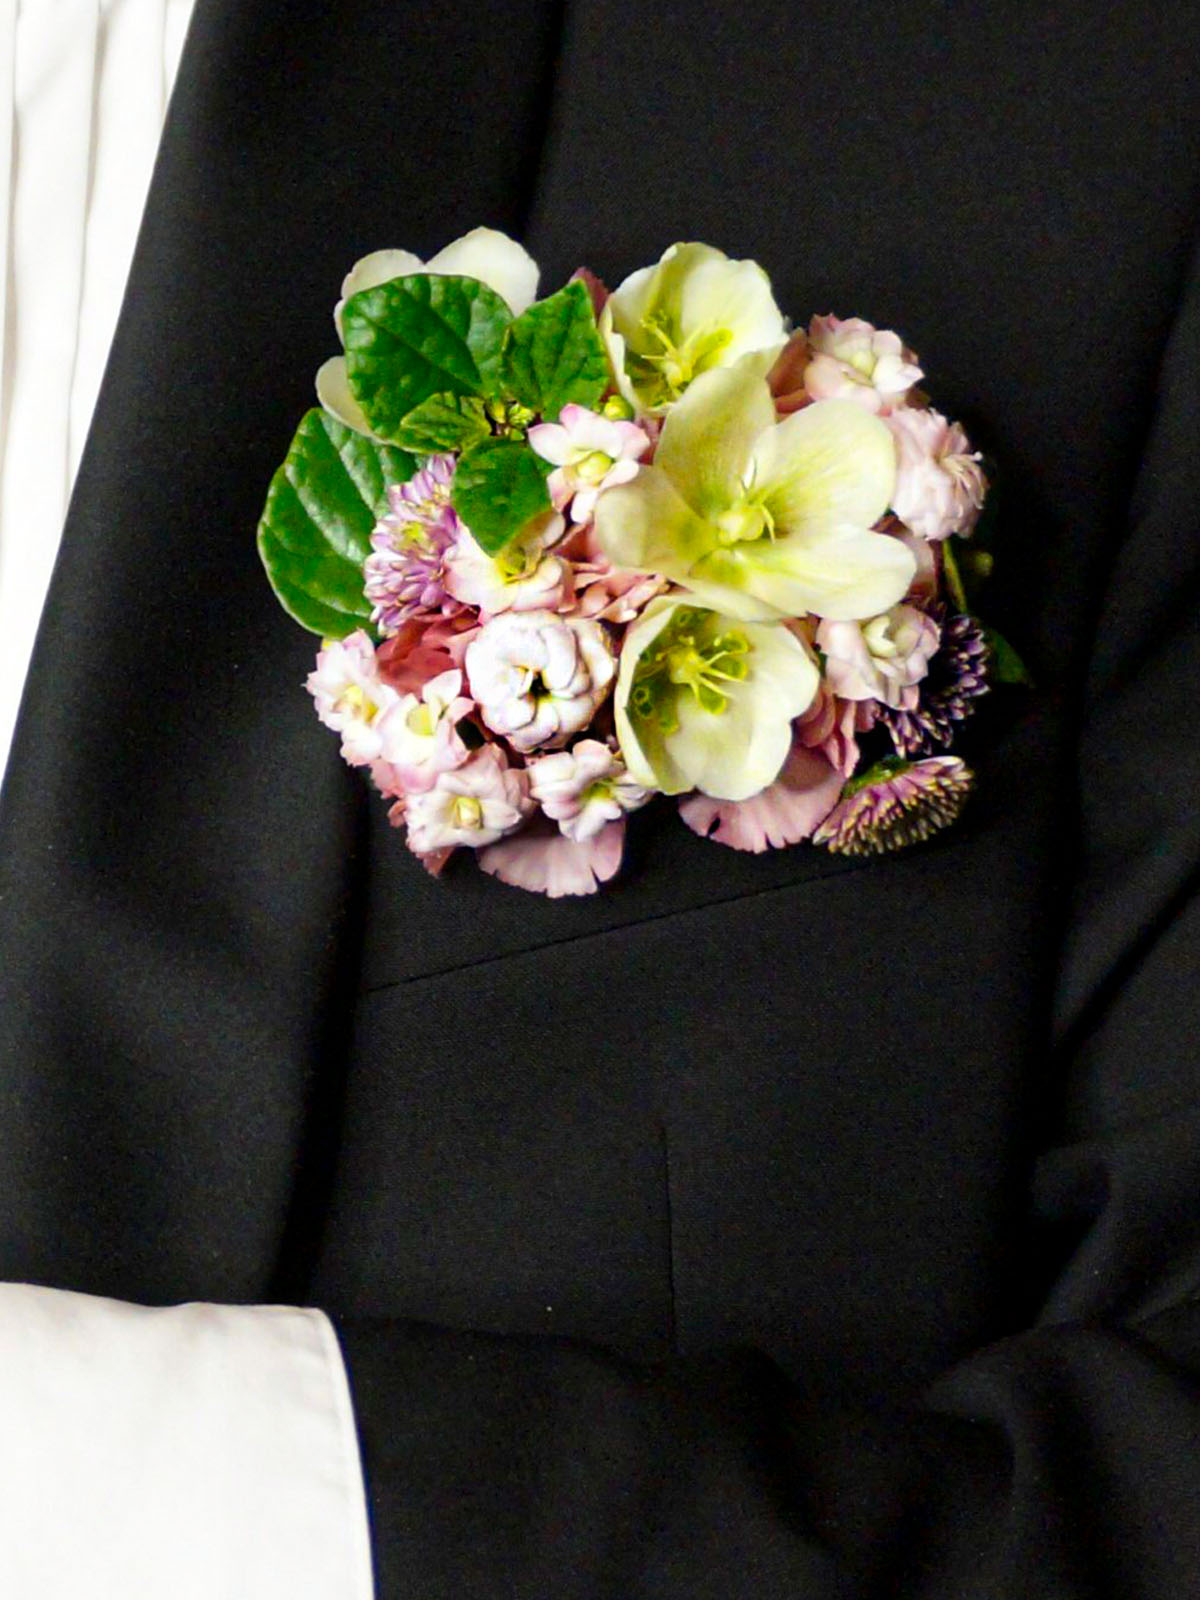 Pocket Bouquets and Cufflinks for Weddings